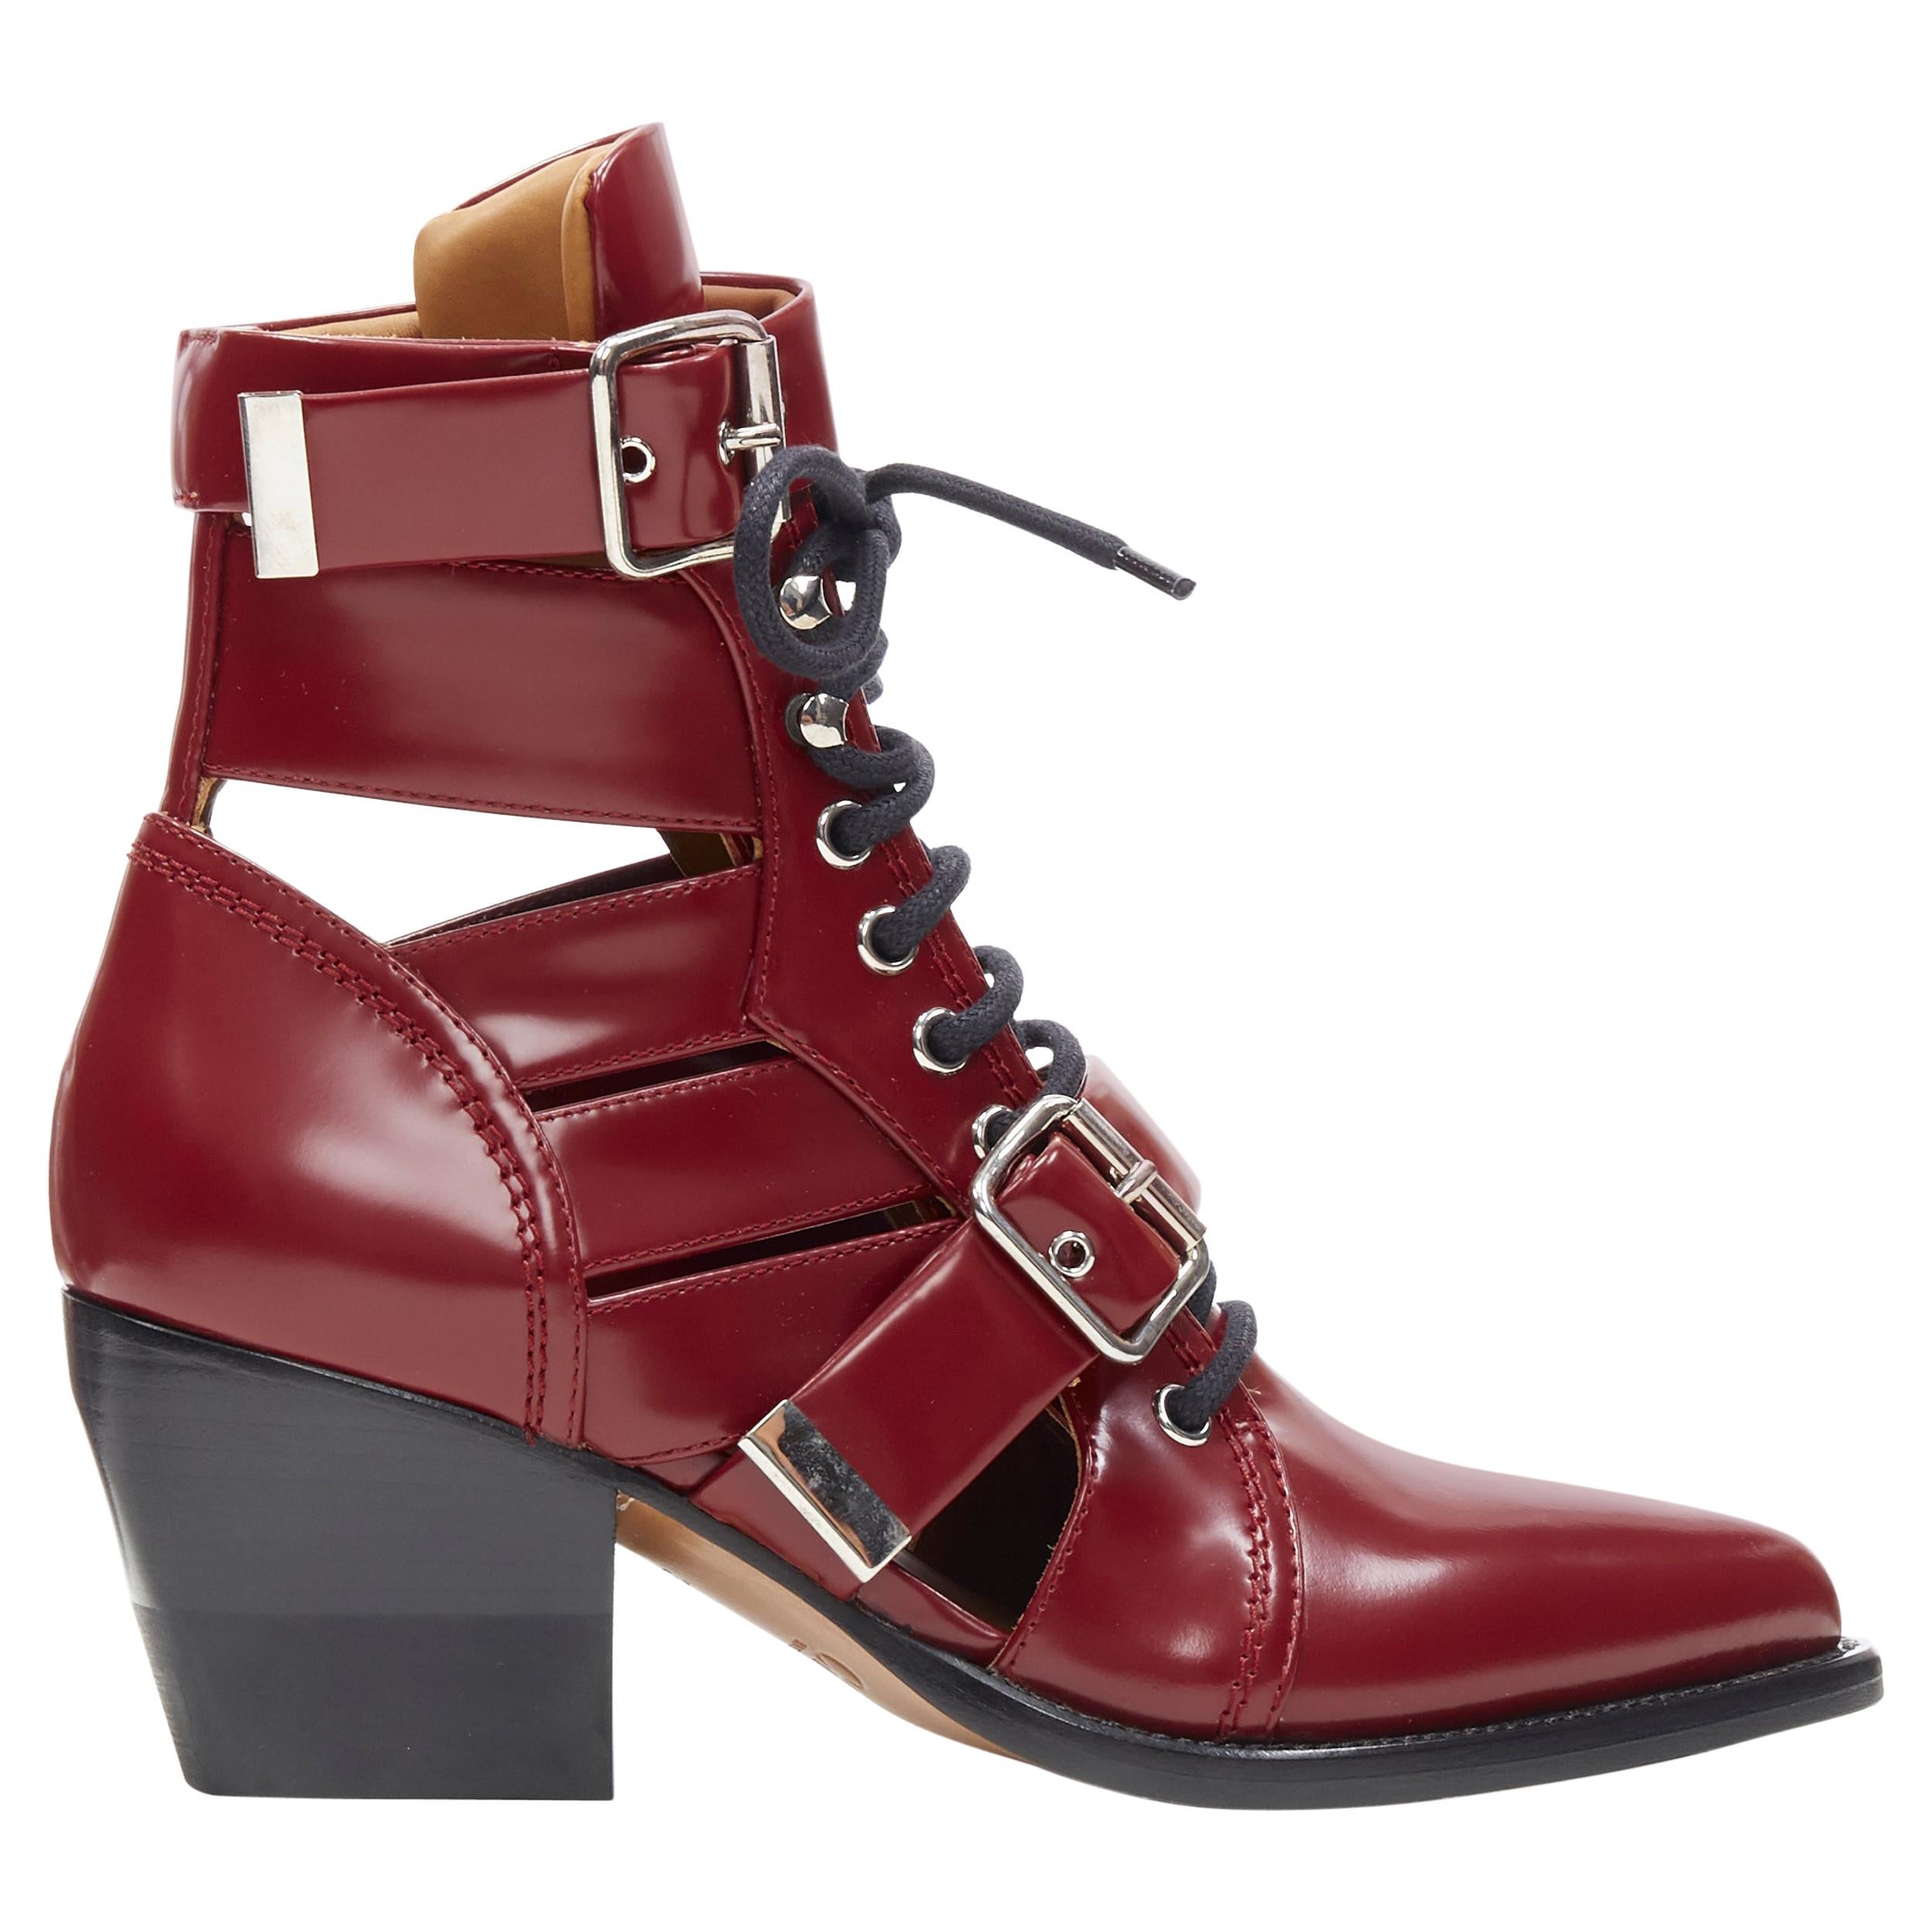 new CHLOE Rylee burgundy red leather cut out buckled pointy ankle boot EU37.5